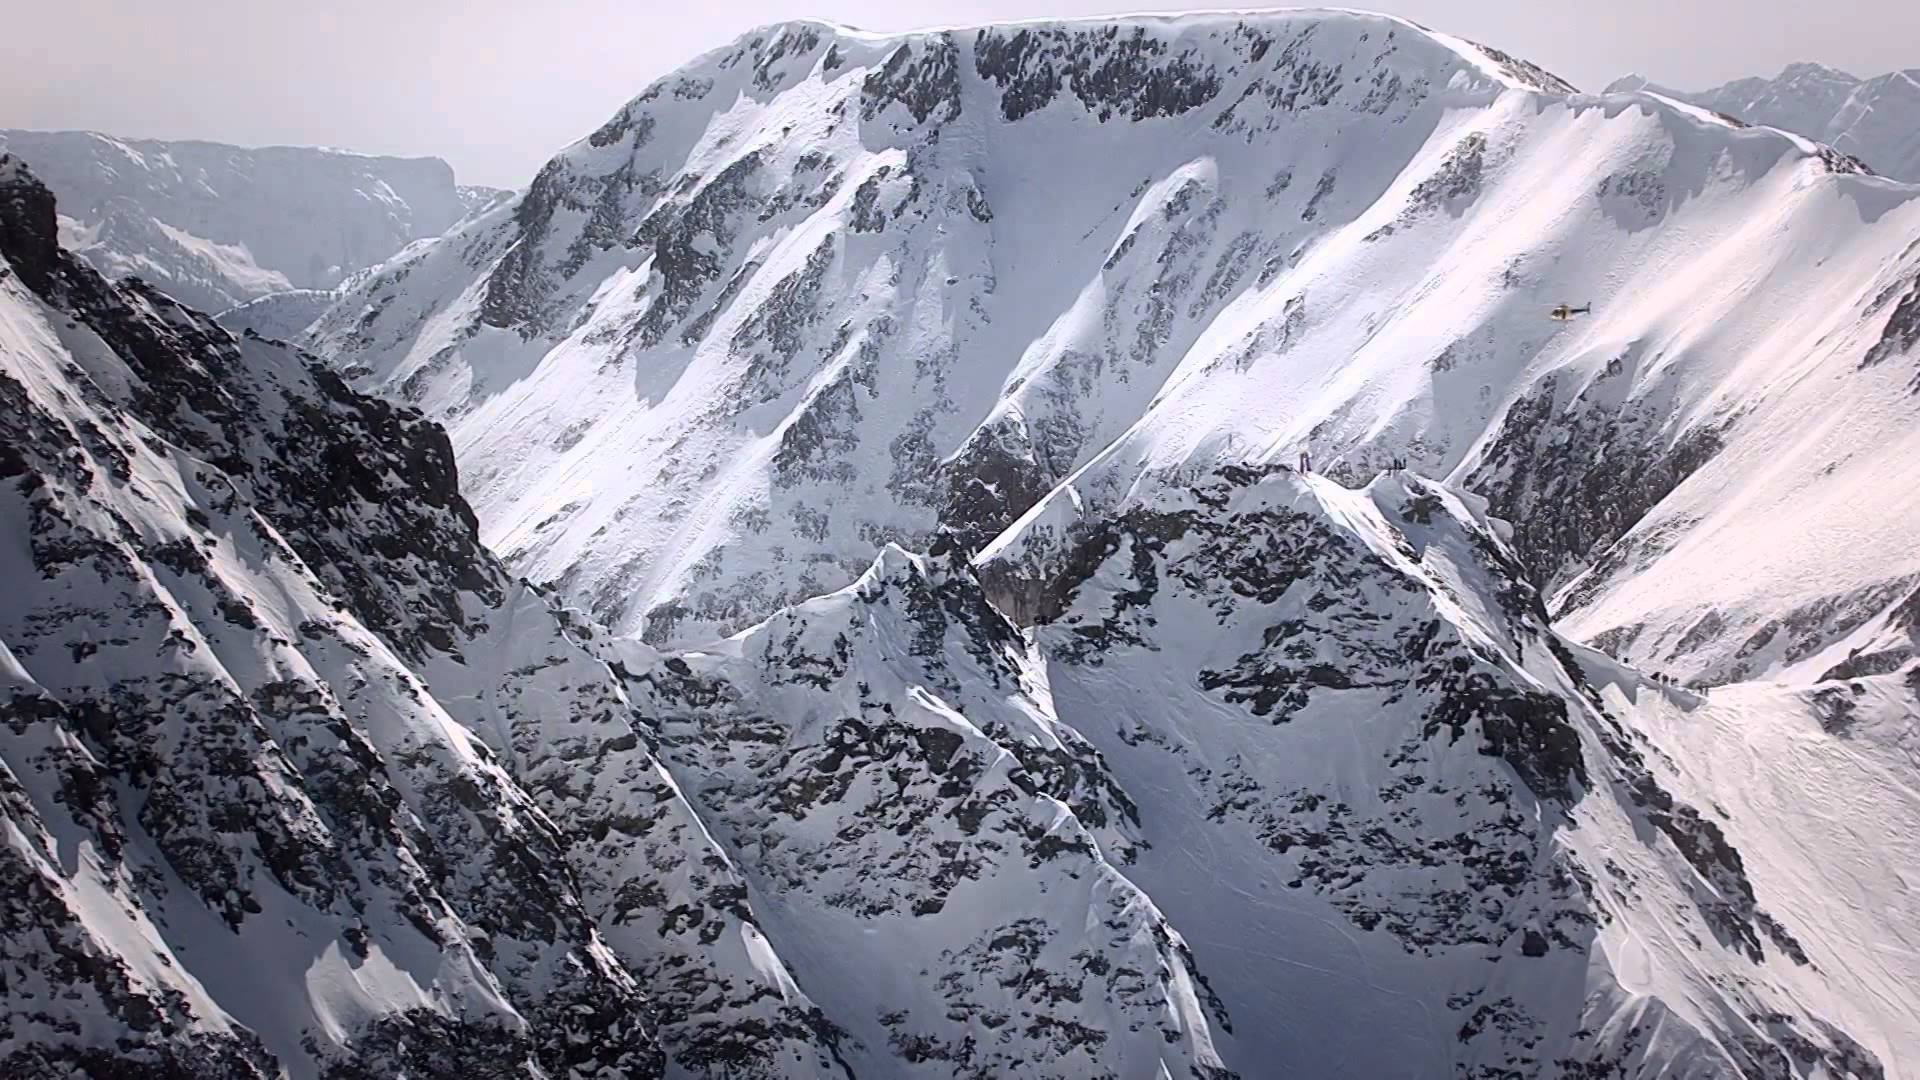 Big mountain free skiing competition - Red Bull Cold Rush 2012 - YouTube